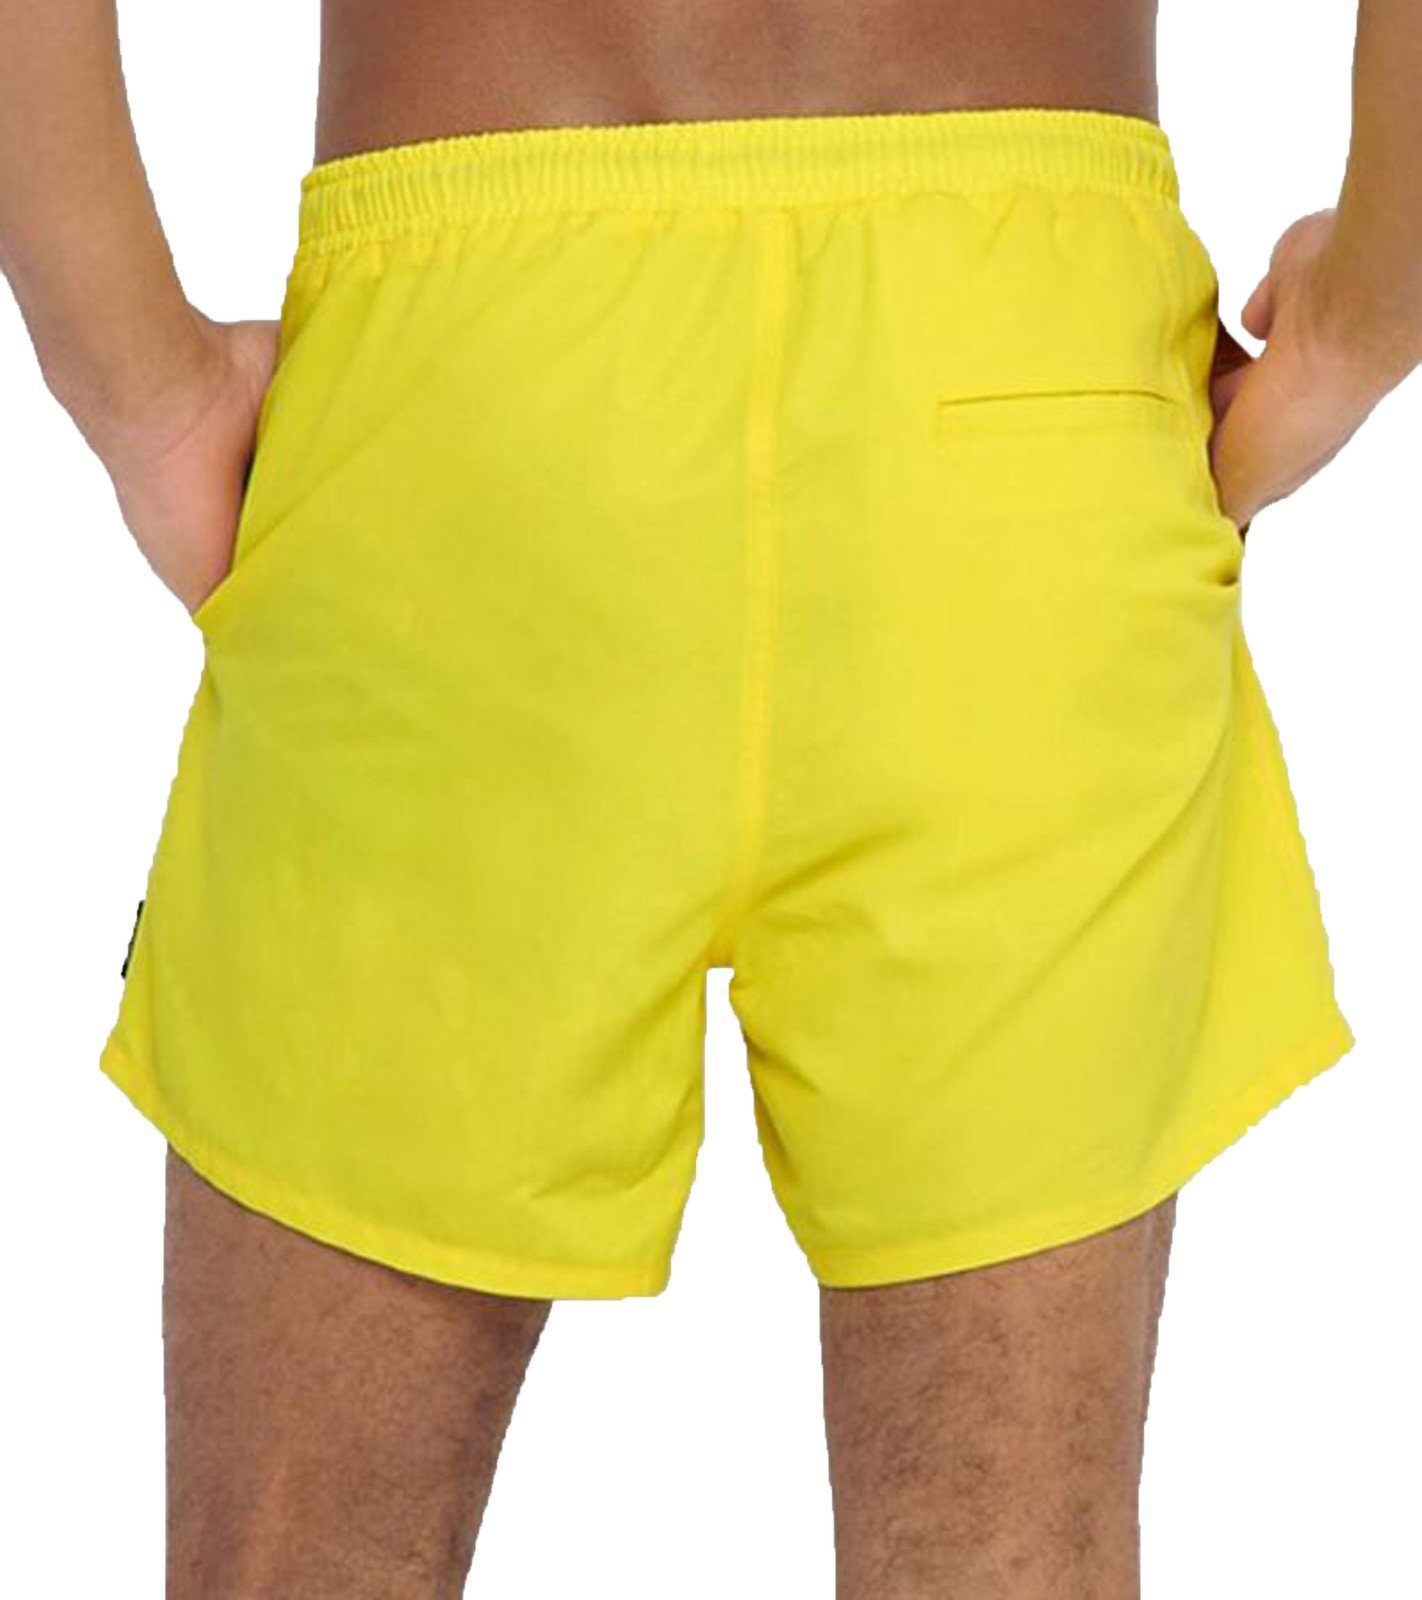 & ONLY SONS & Gelb Herren SONS ONLY Schwimmhose Bade-Shorts GD Ted Stoffhose